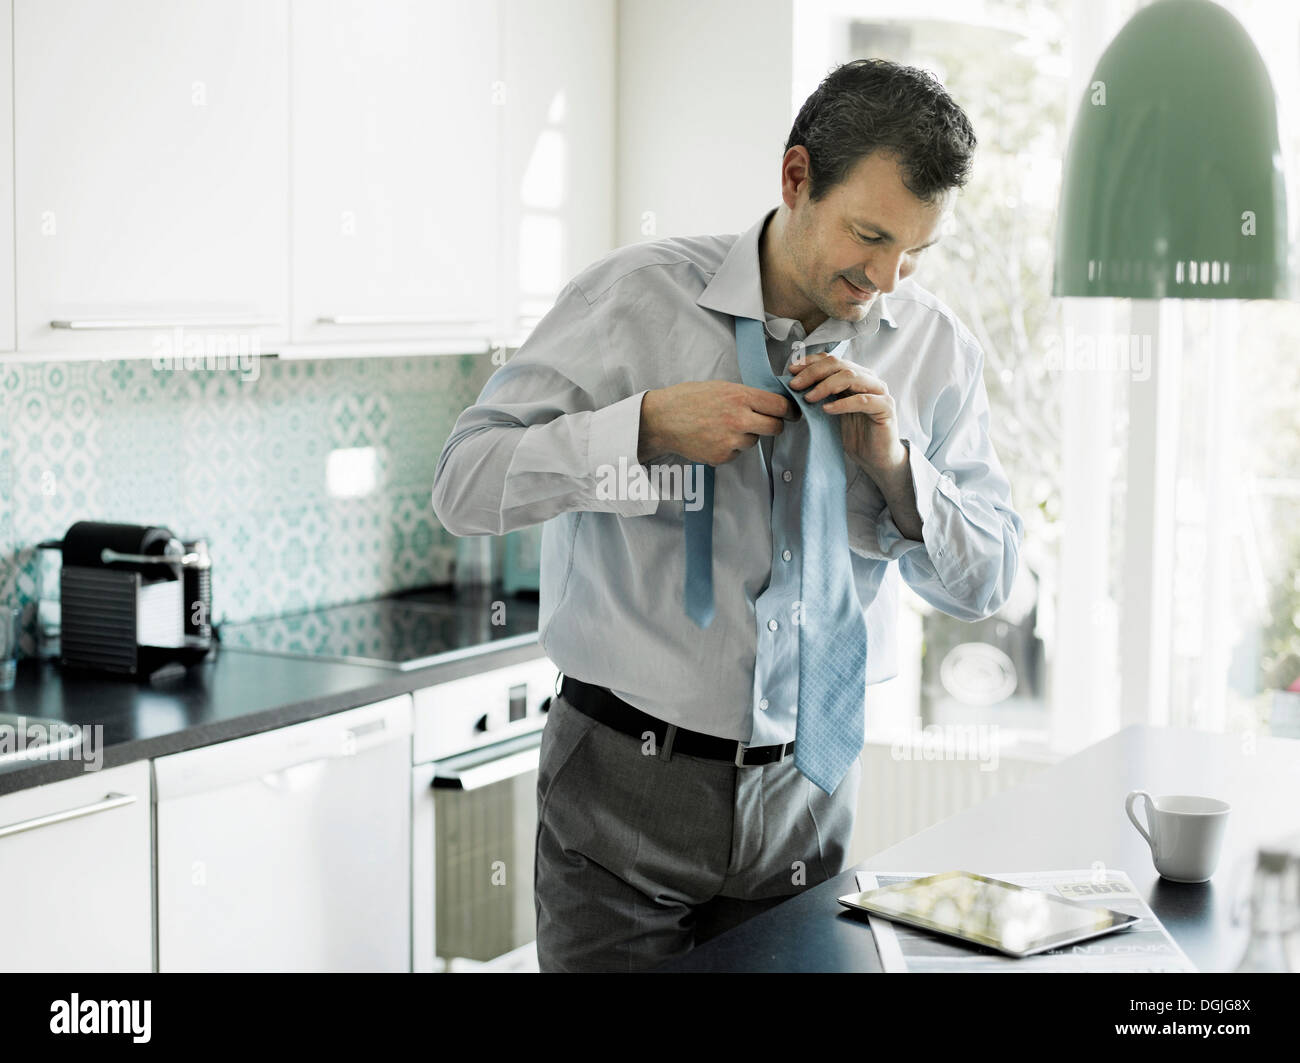 Mature businessman getting ready and using tablet in kitchen Stock Photo